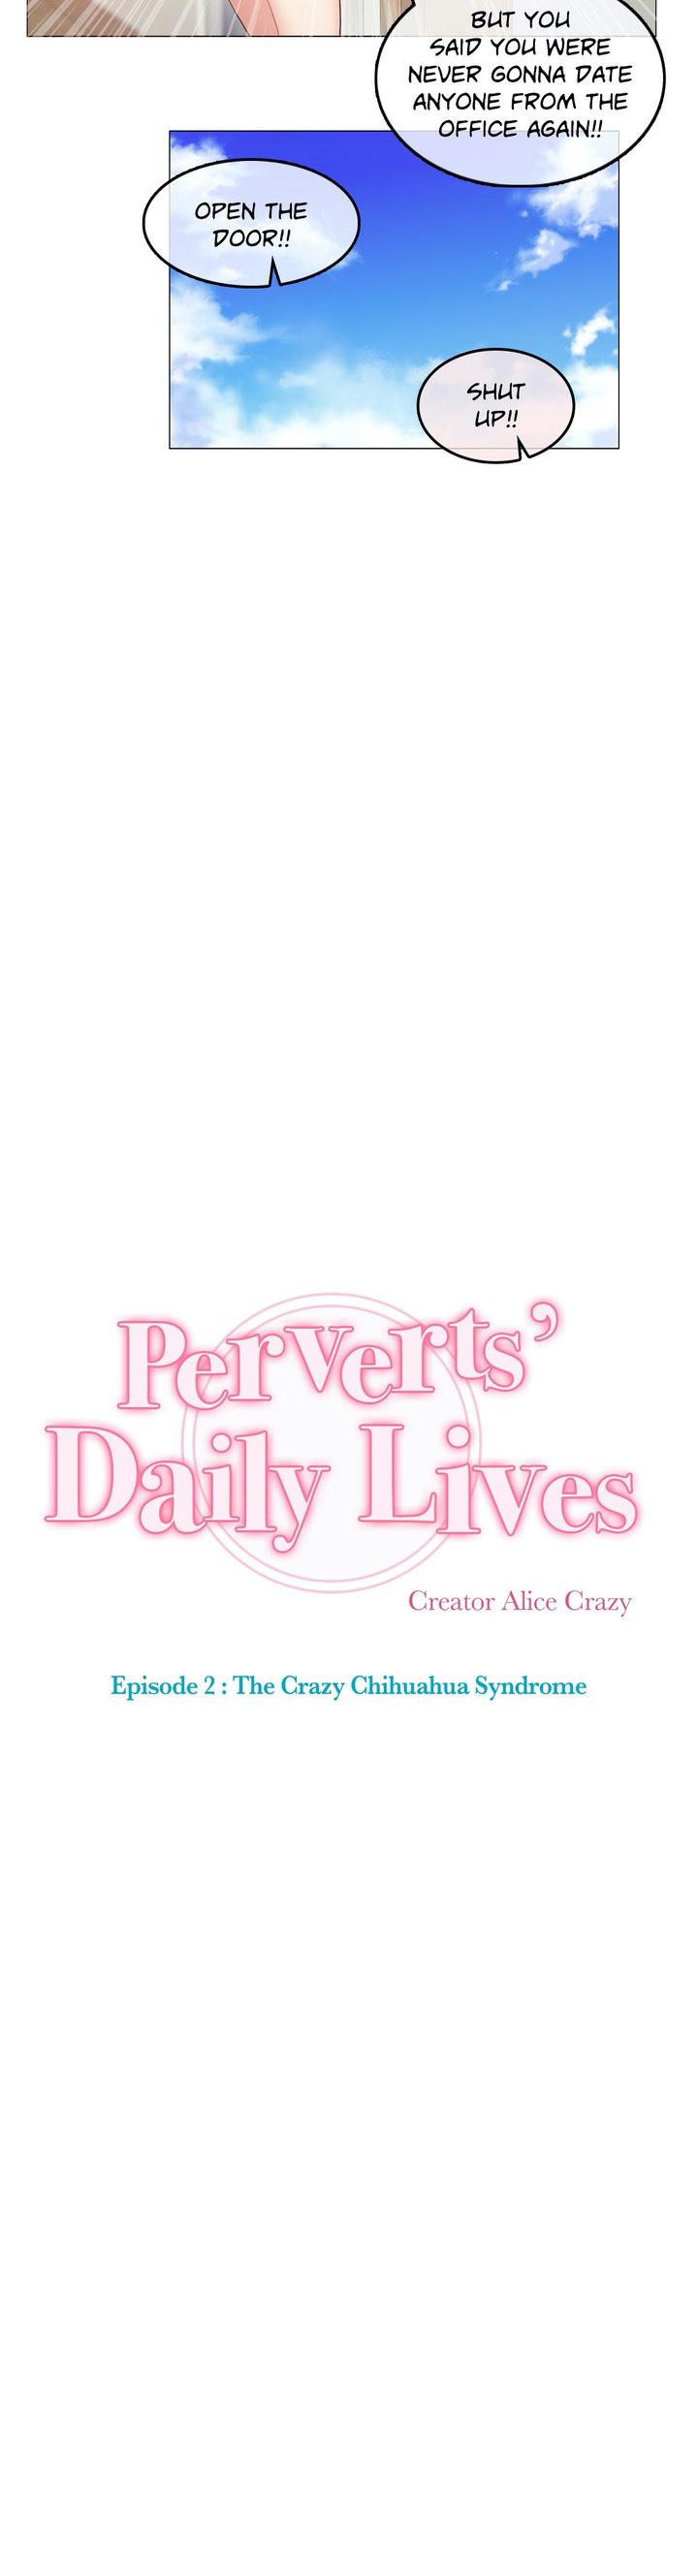 Perverts' Daily Lives Episode 2: Crazy Chihuahua Syndrome 152